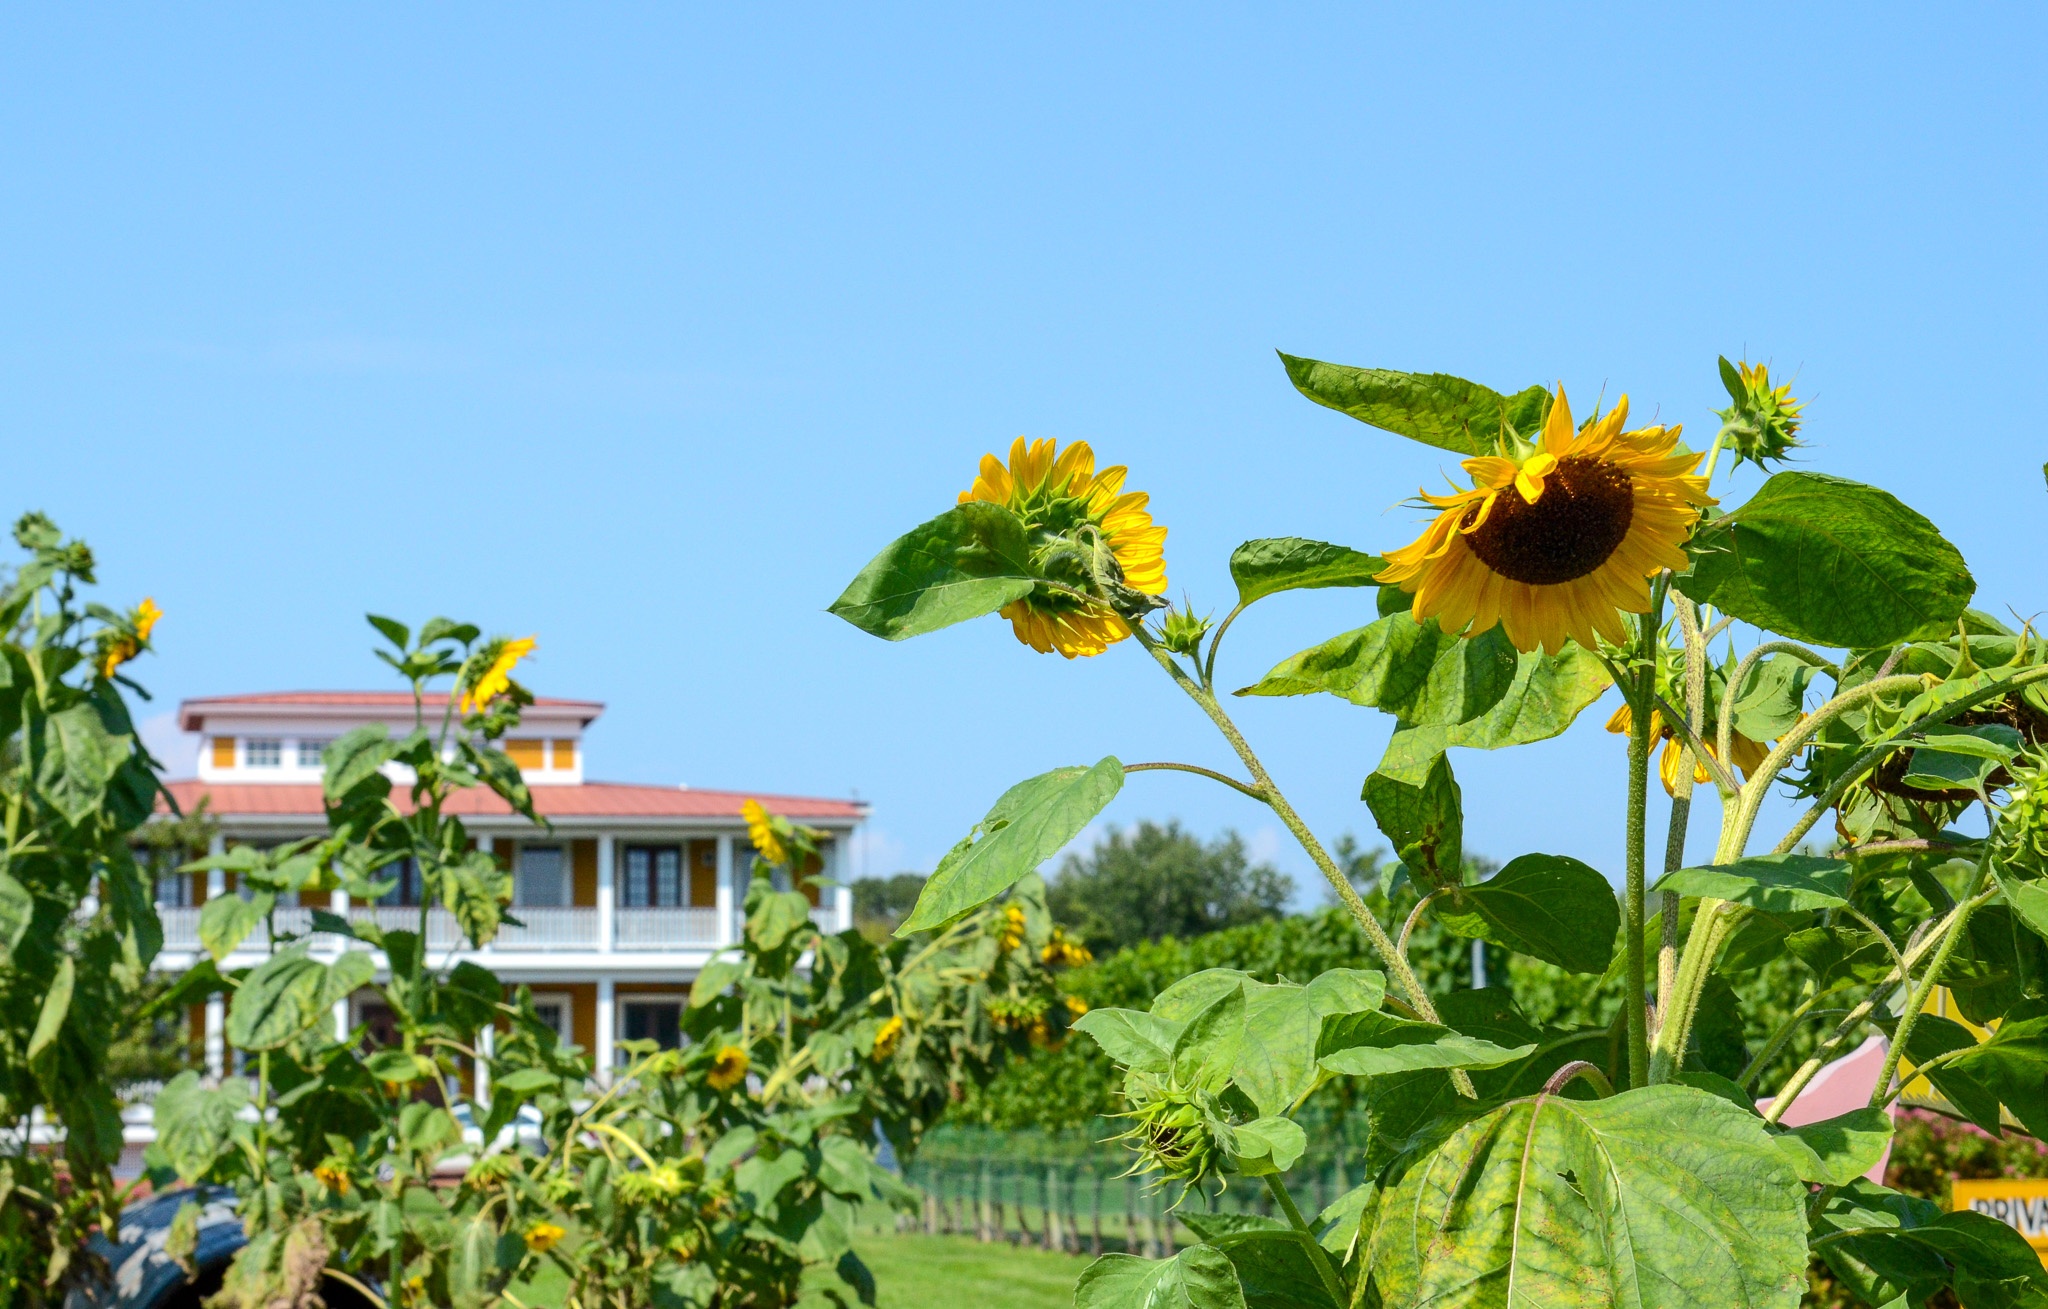 Sunflowers at Willow Creek